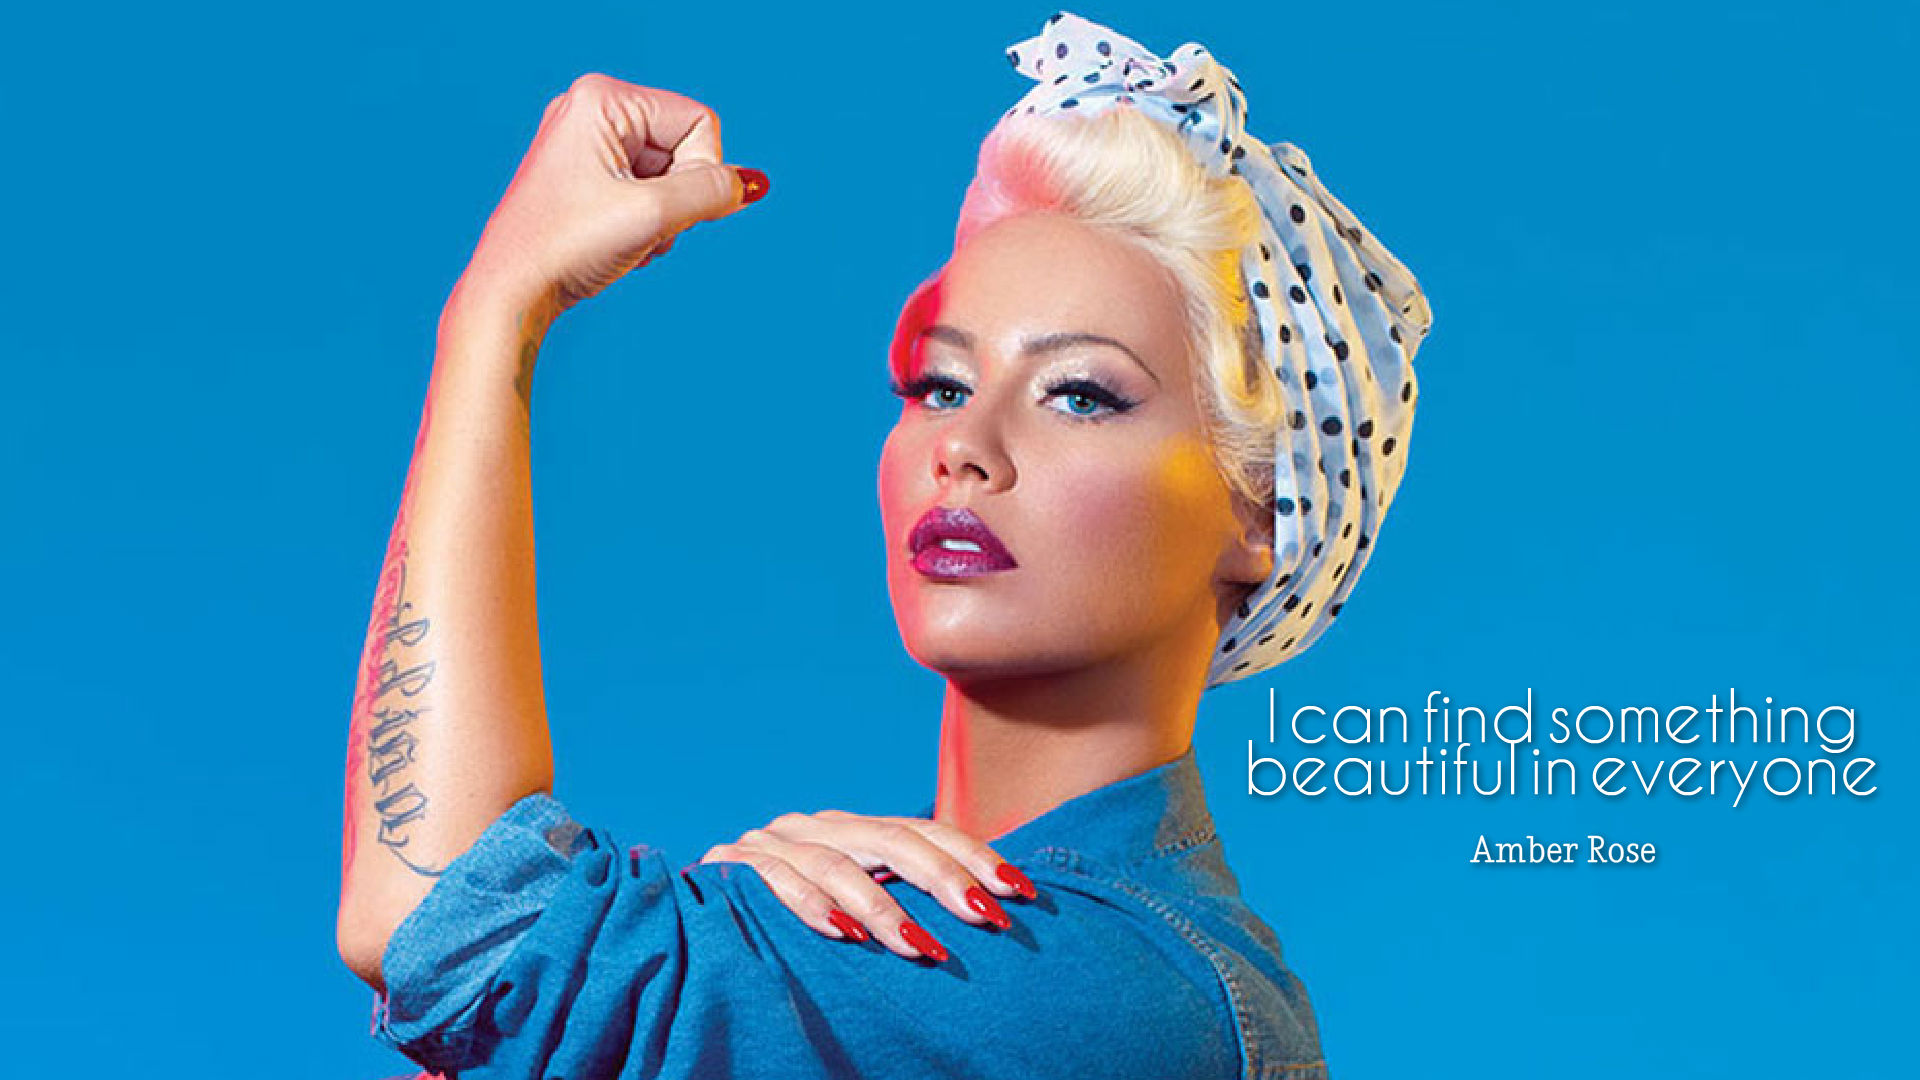 Amber Rose Quotes Wallpaper HD 